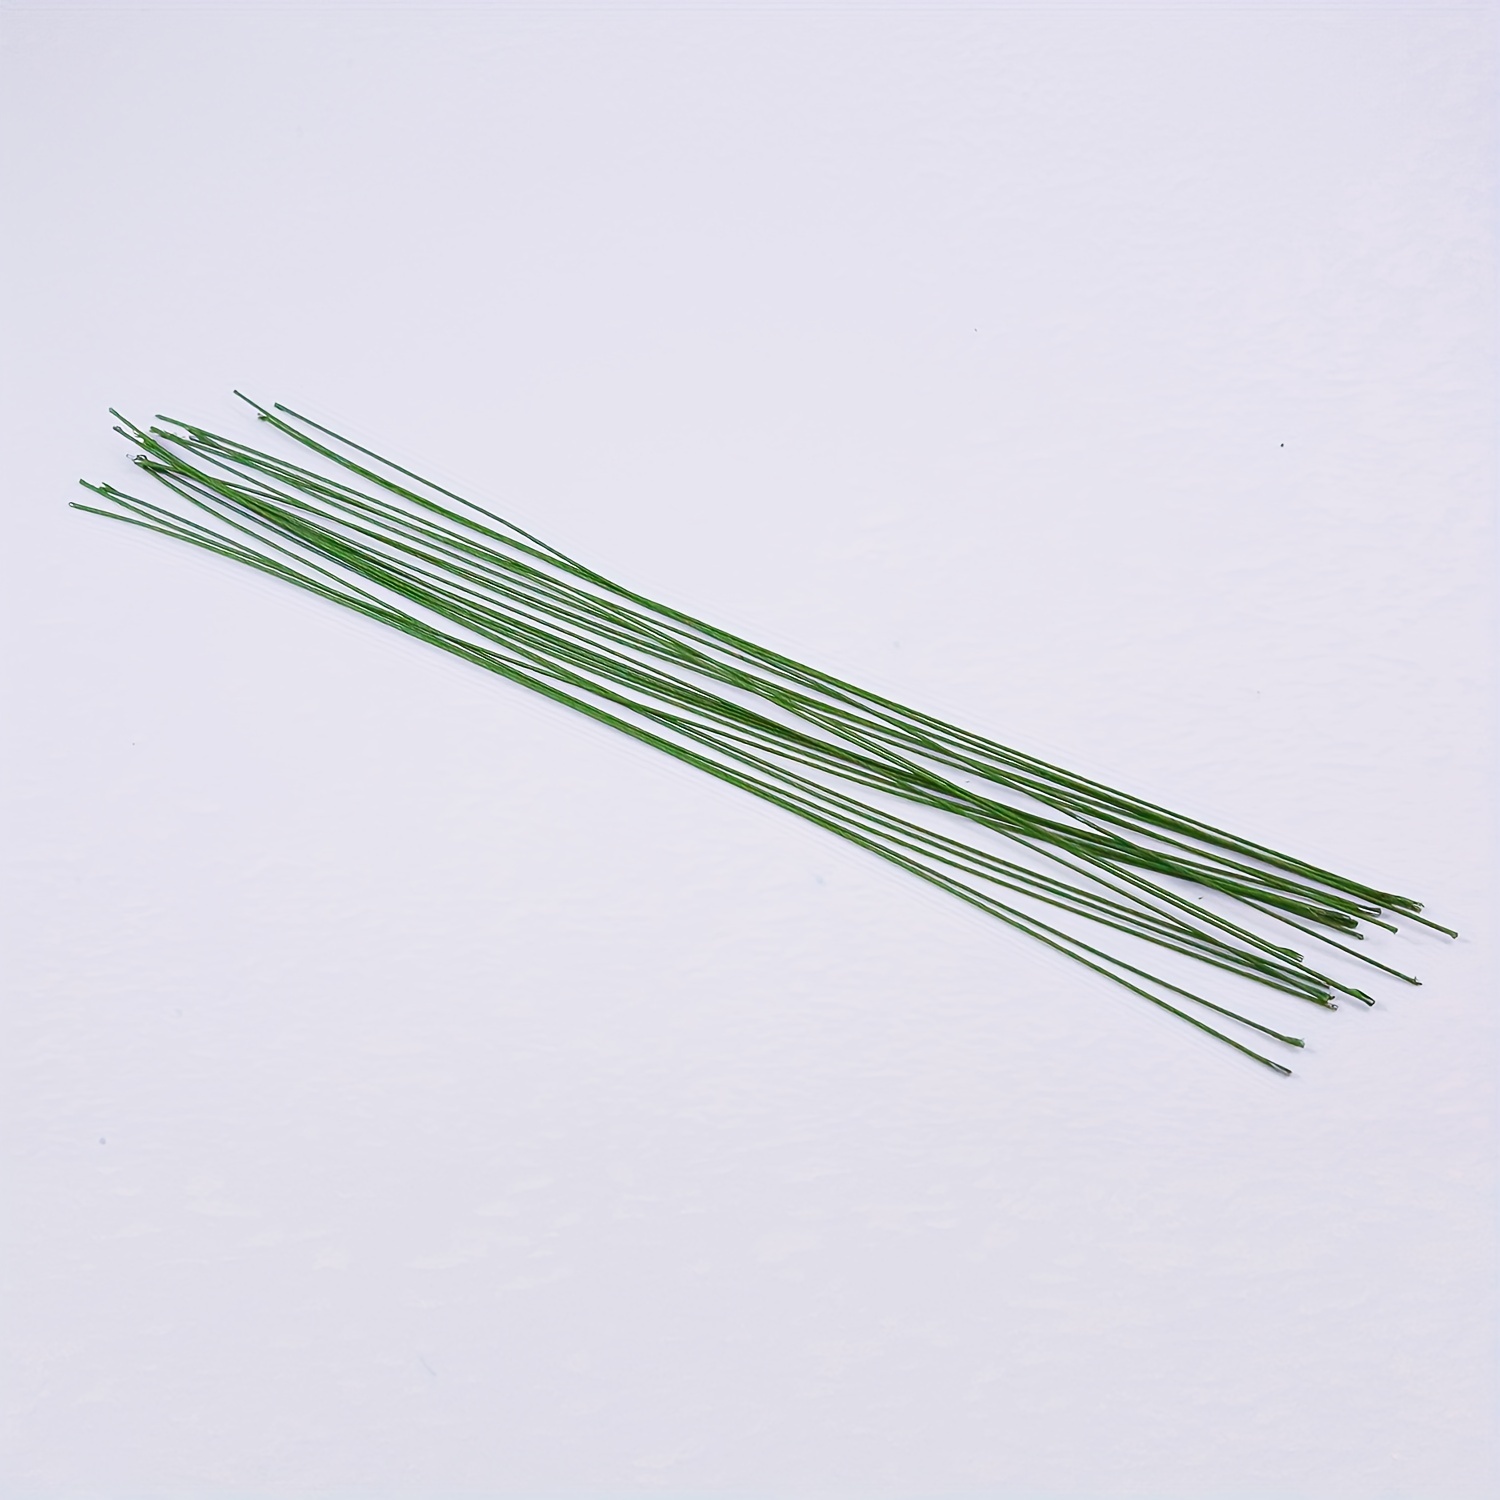 Floral Wire 100pcs Green Floral Wire For Crafts Flower Making Green  Crafting Floral Stem Wire Floral